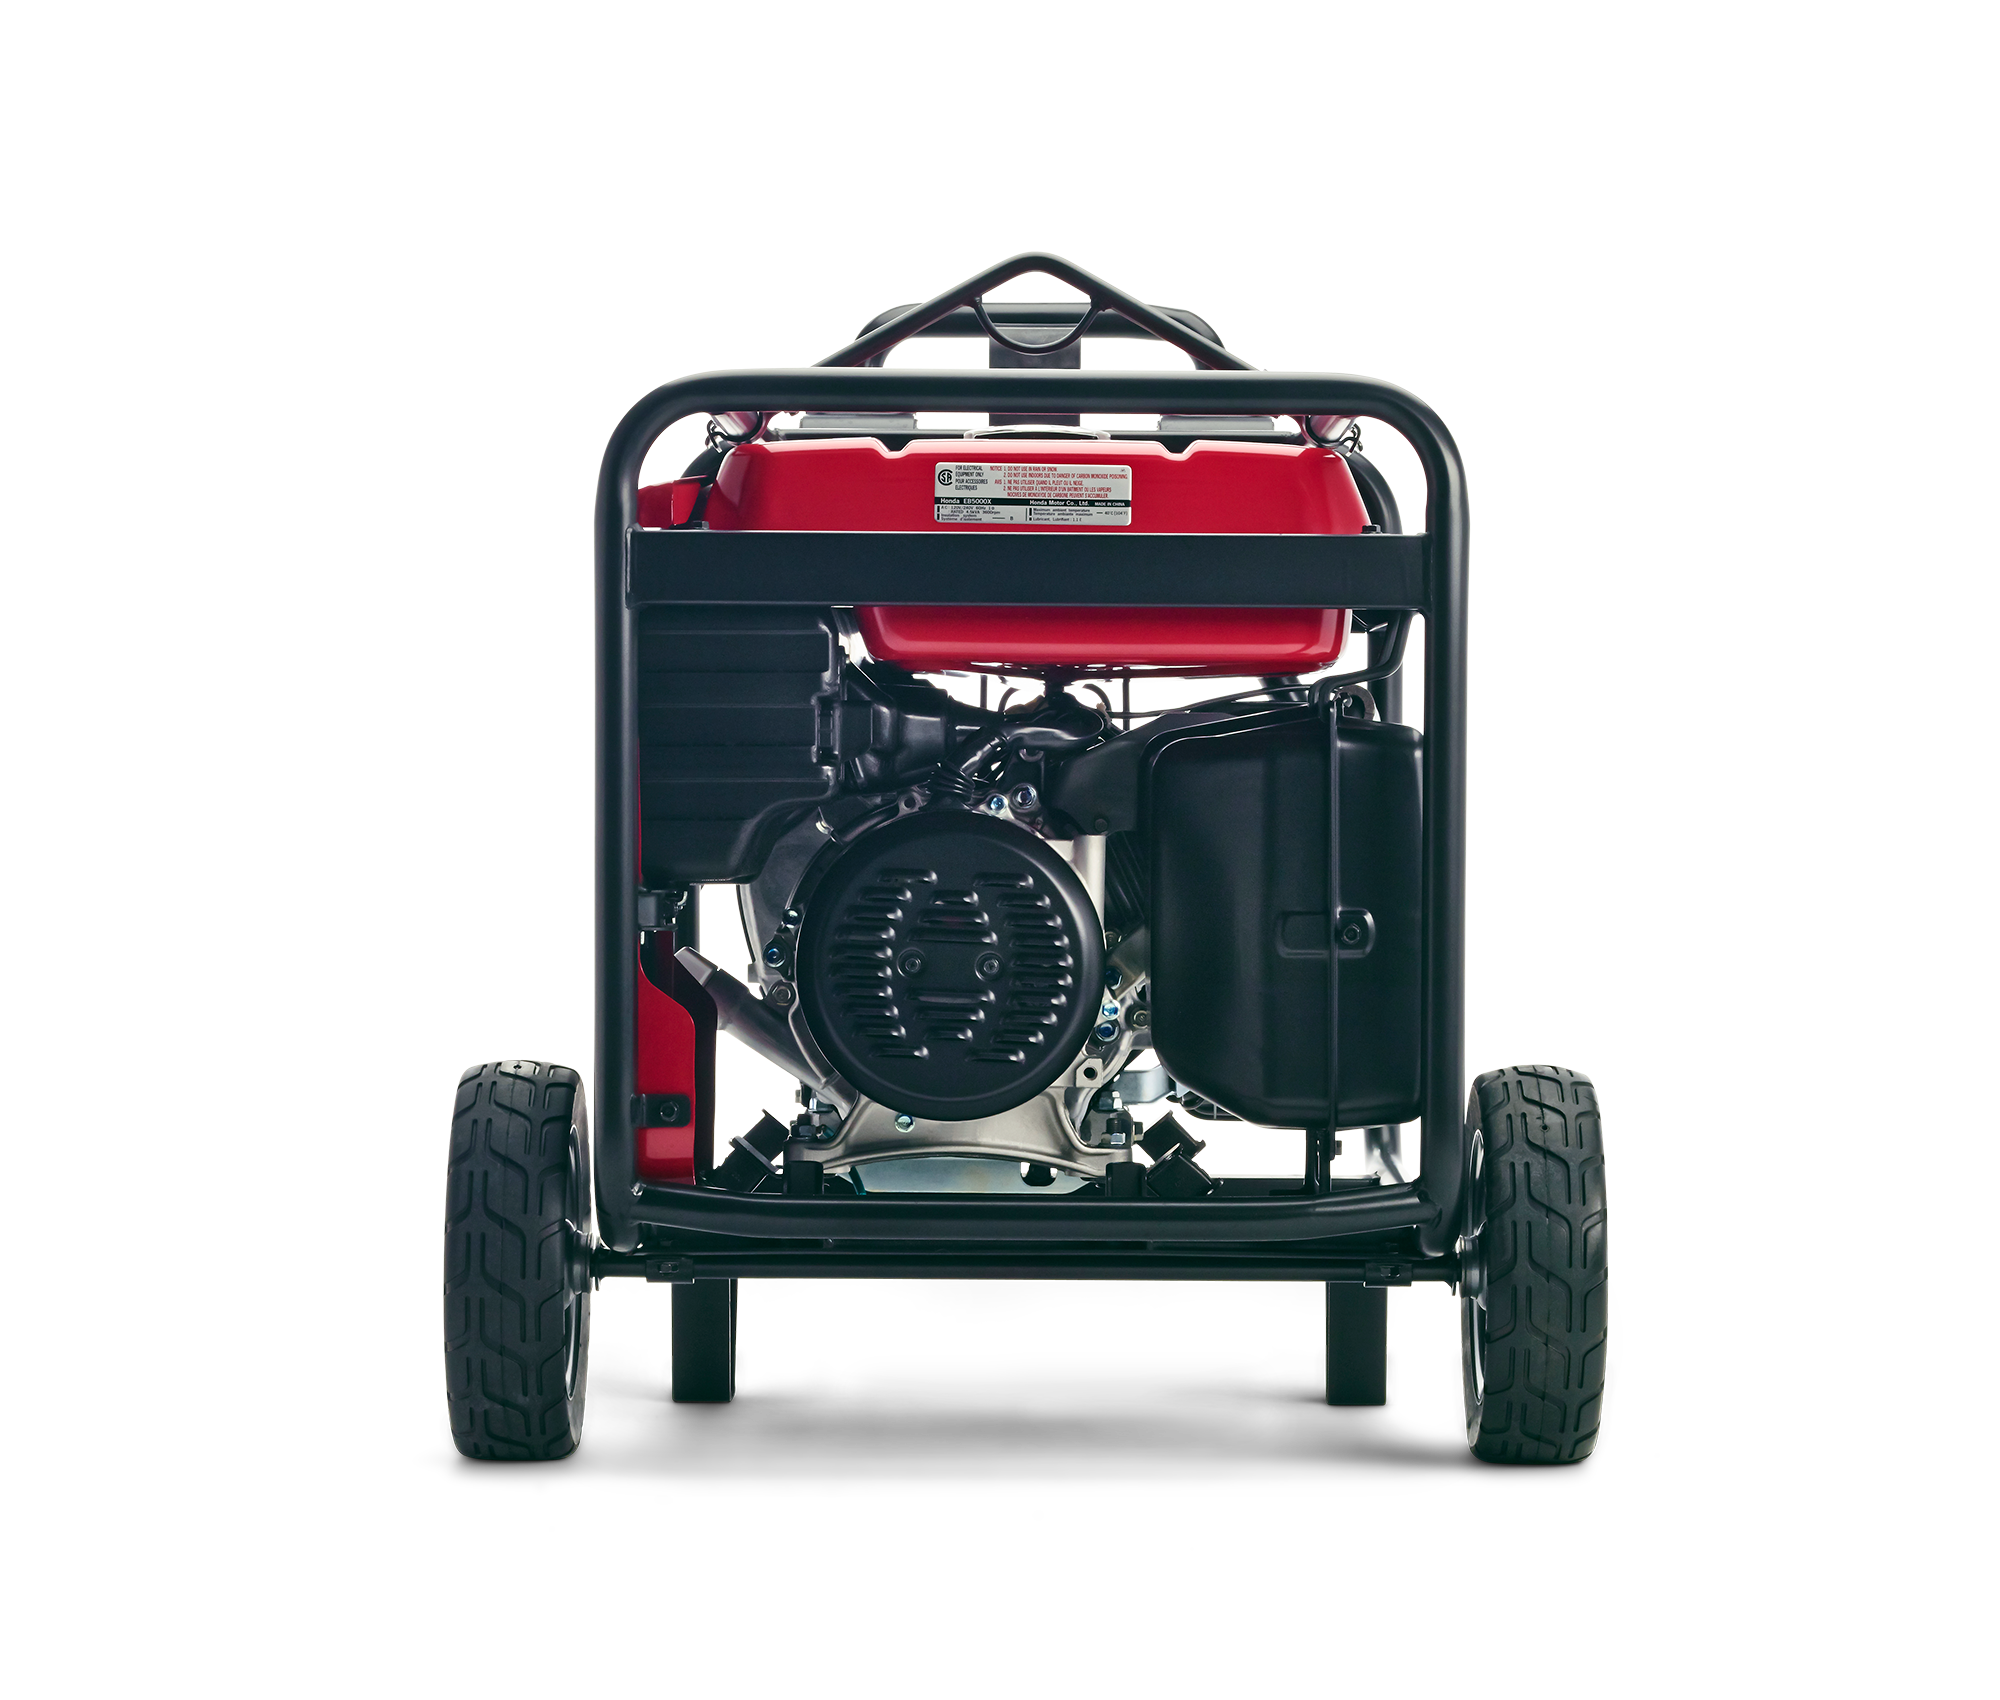 Image of the Commercial 5000 GFCI generator